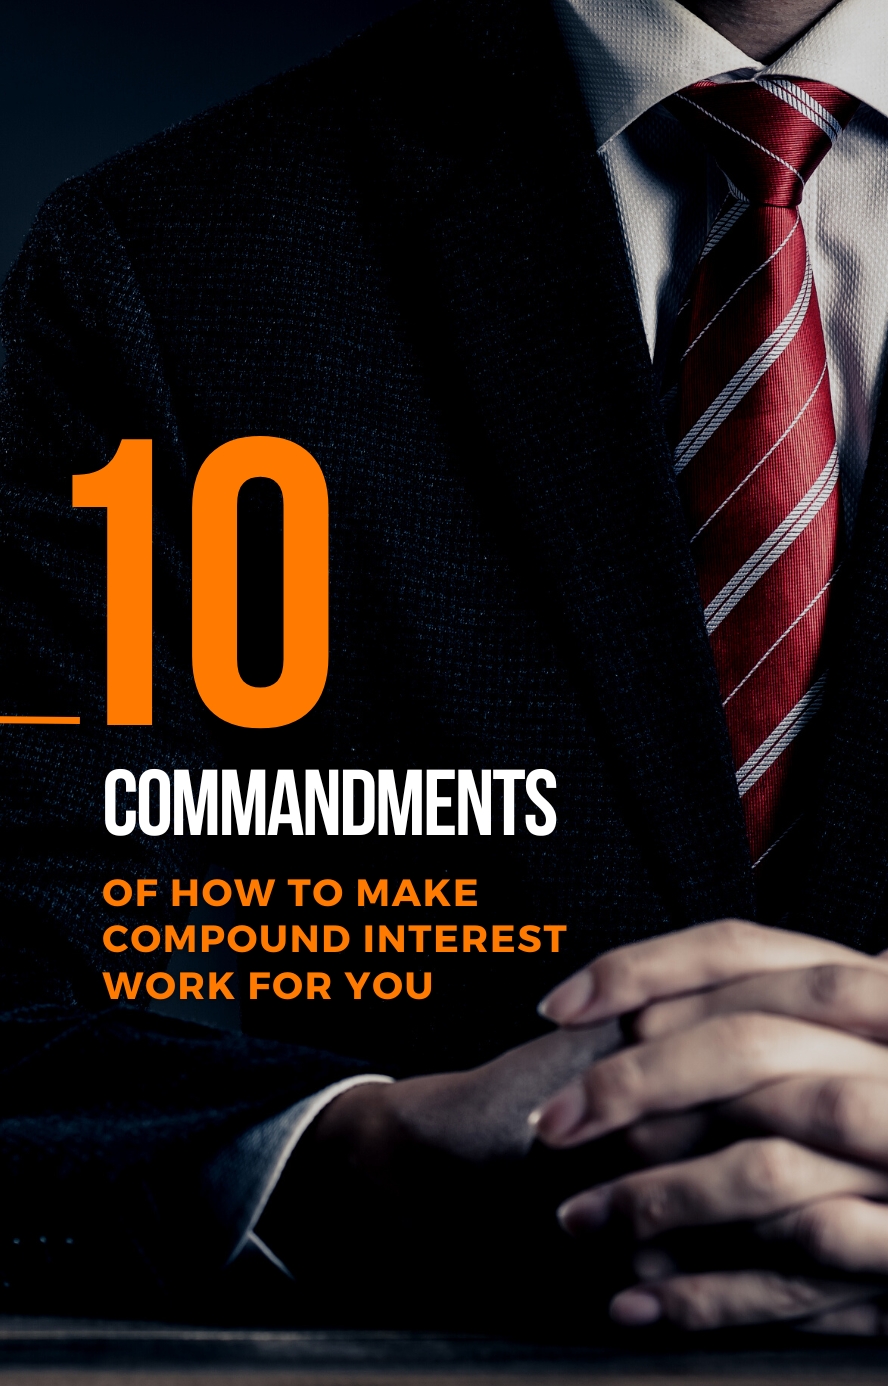 10 Commandments of How to Make Compound Interest Work for You